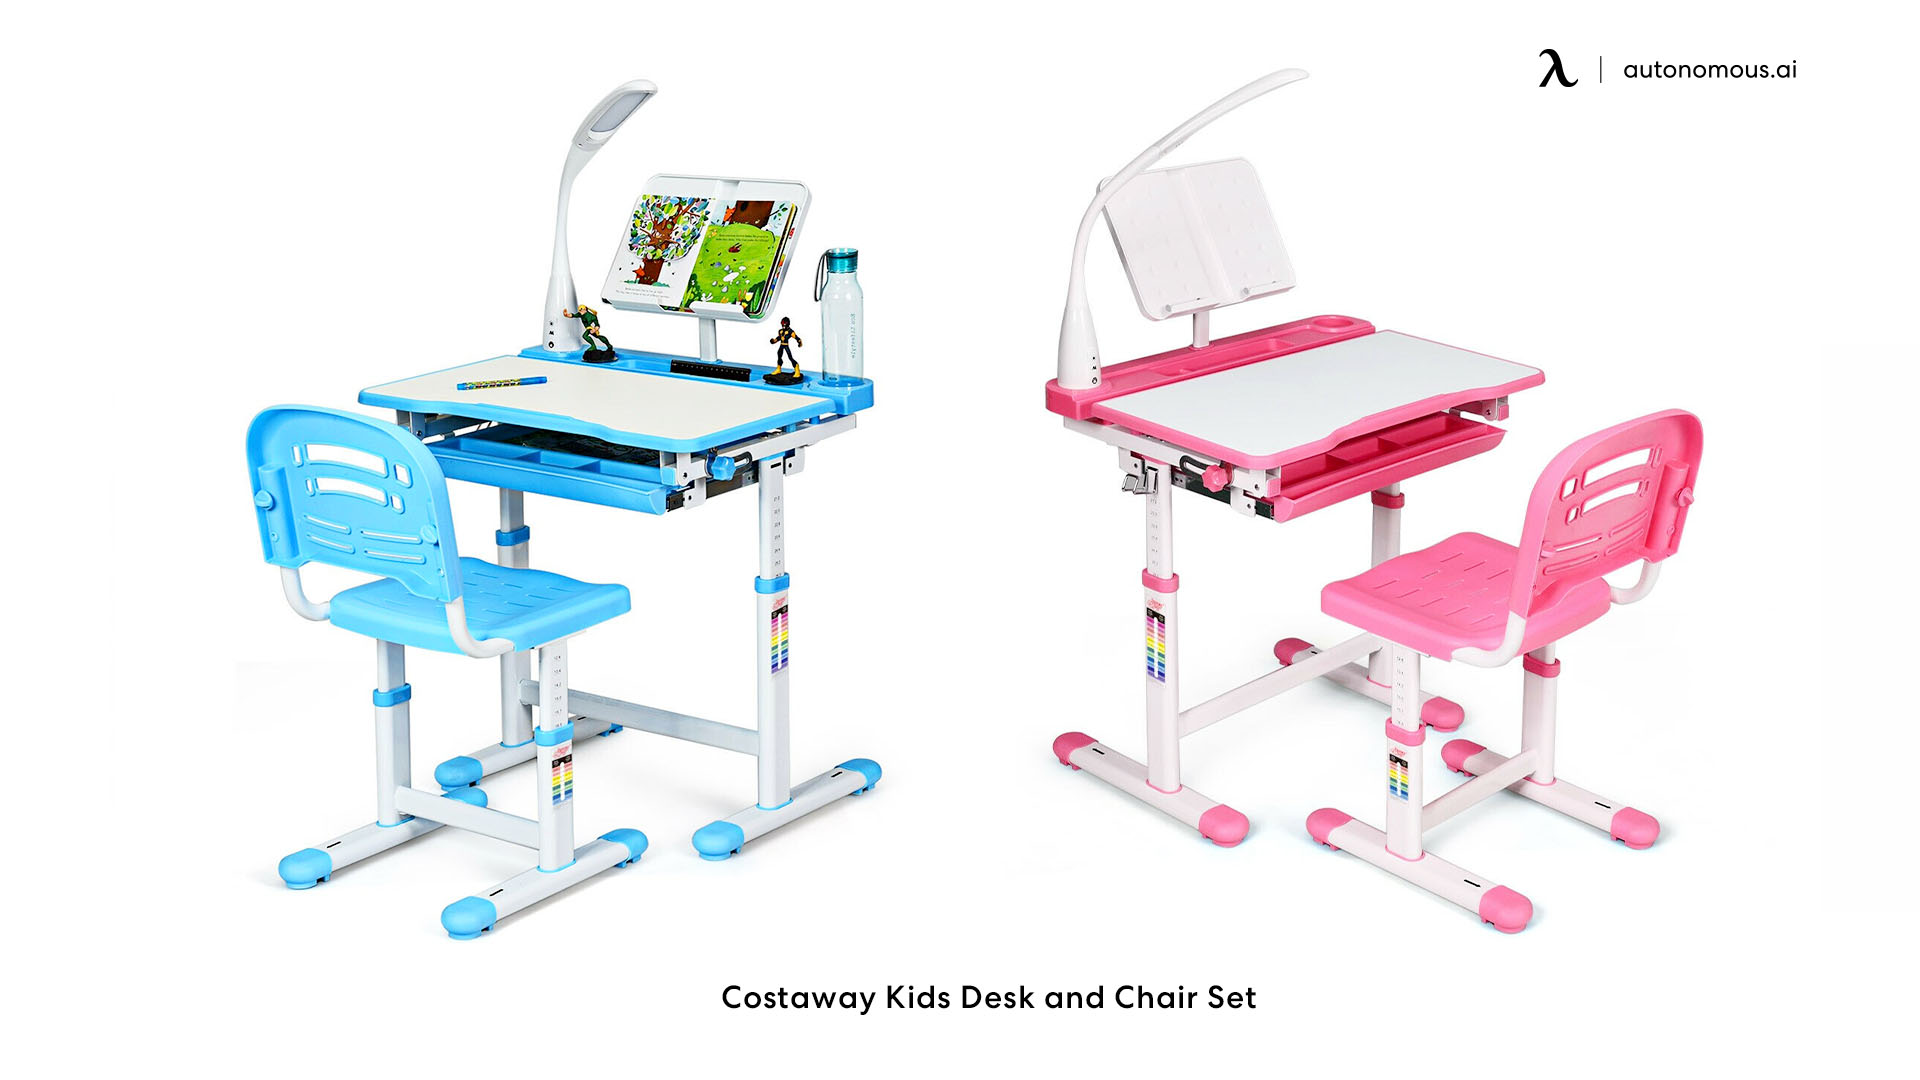 Costaway Kids Desk and Chair Set